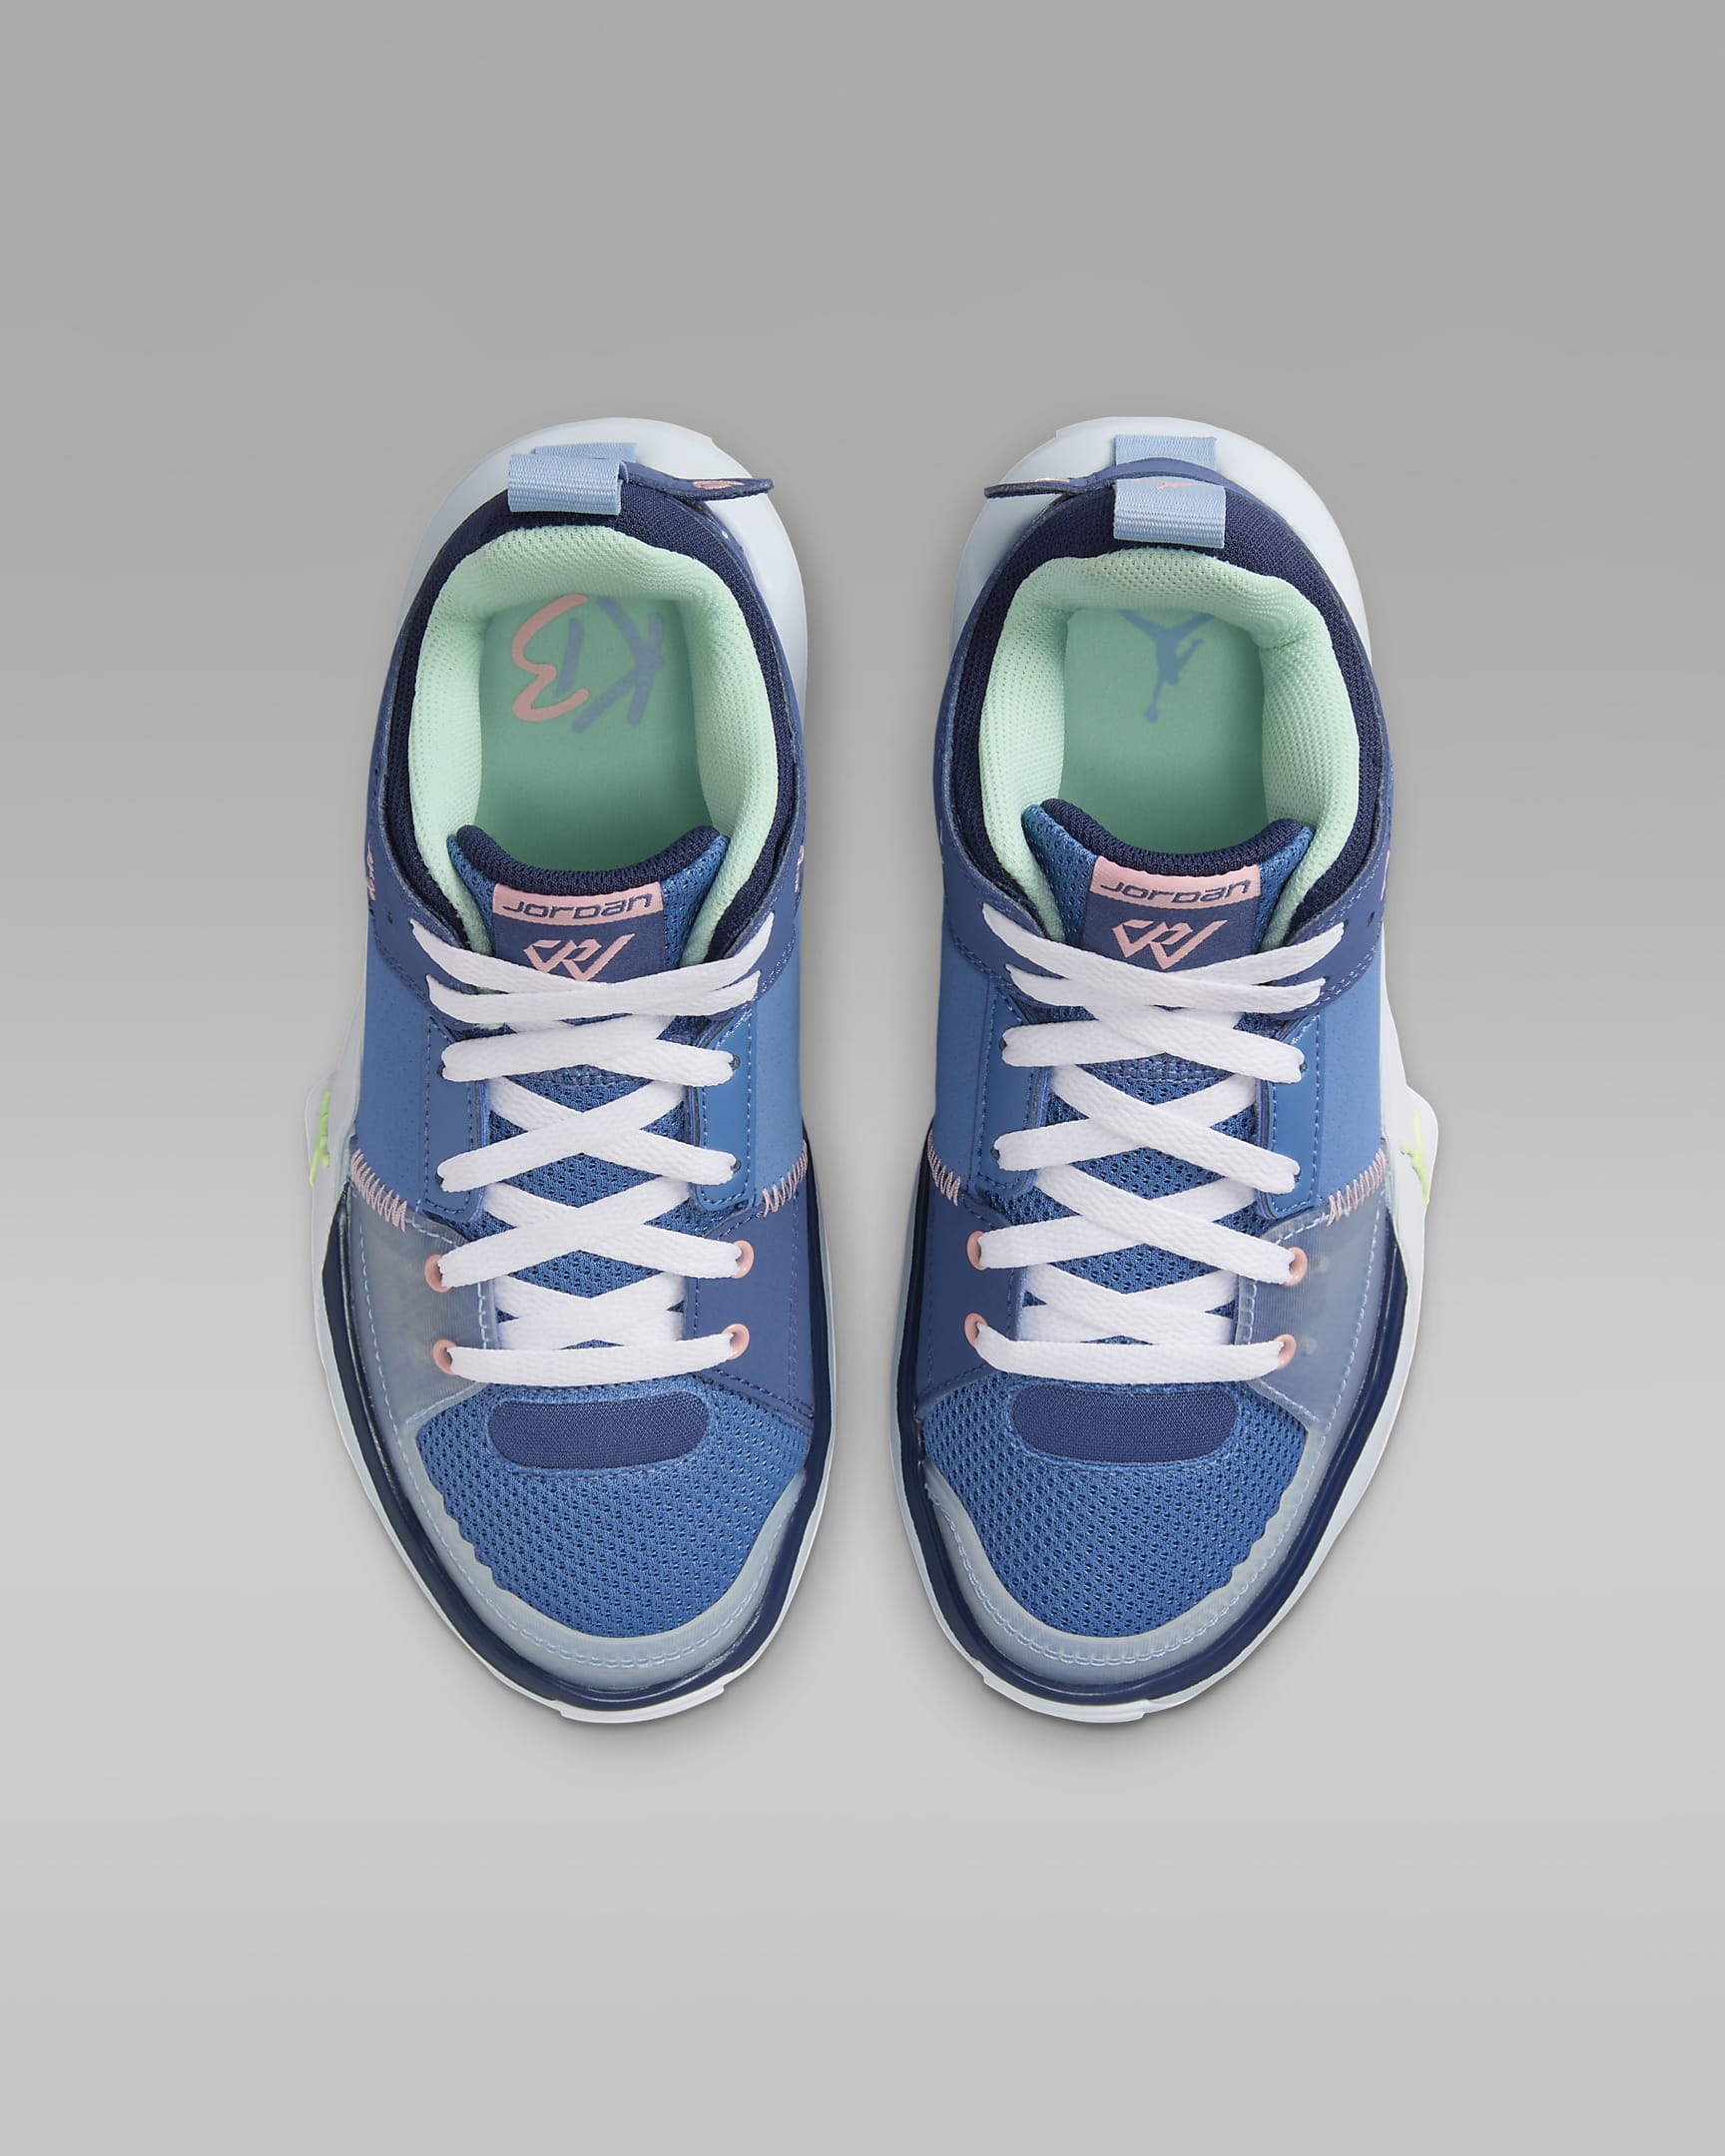 Jordan One Take 5 Older Kids' Shoes - Stone Blue/Mystic Navy/Midnight Navy/Bleached Coral